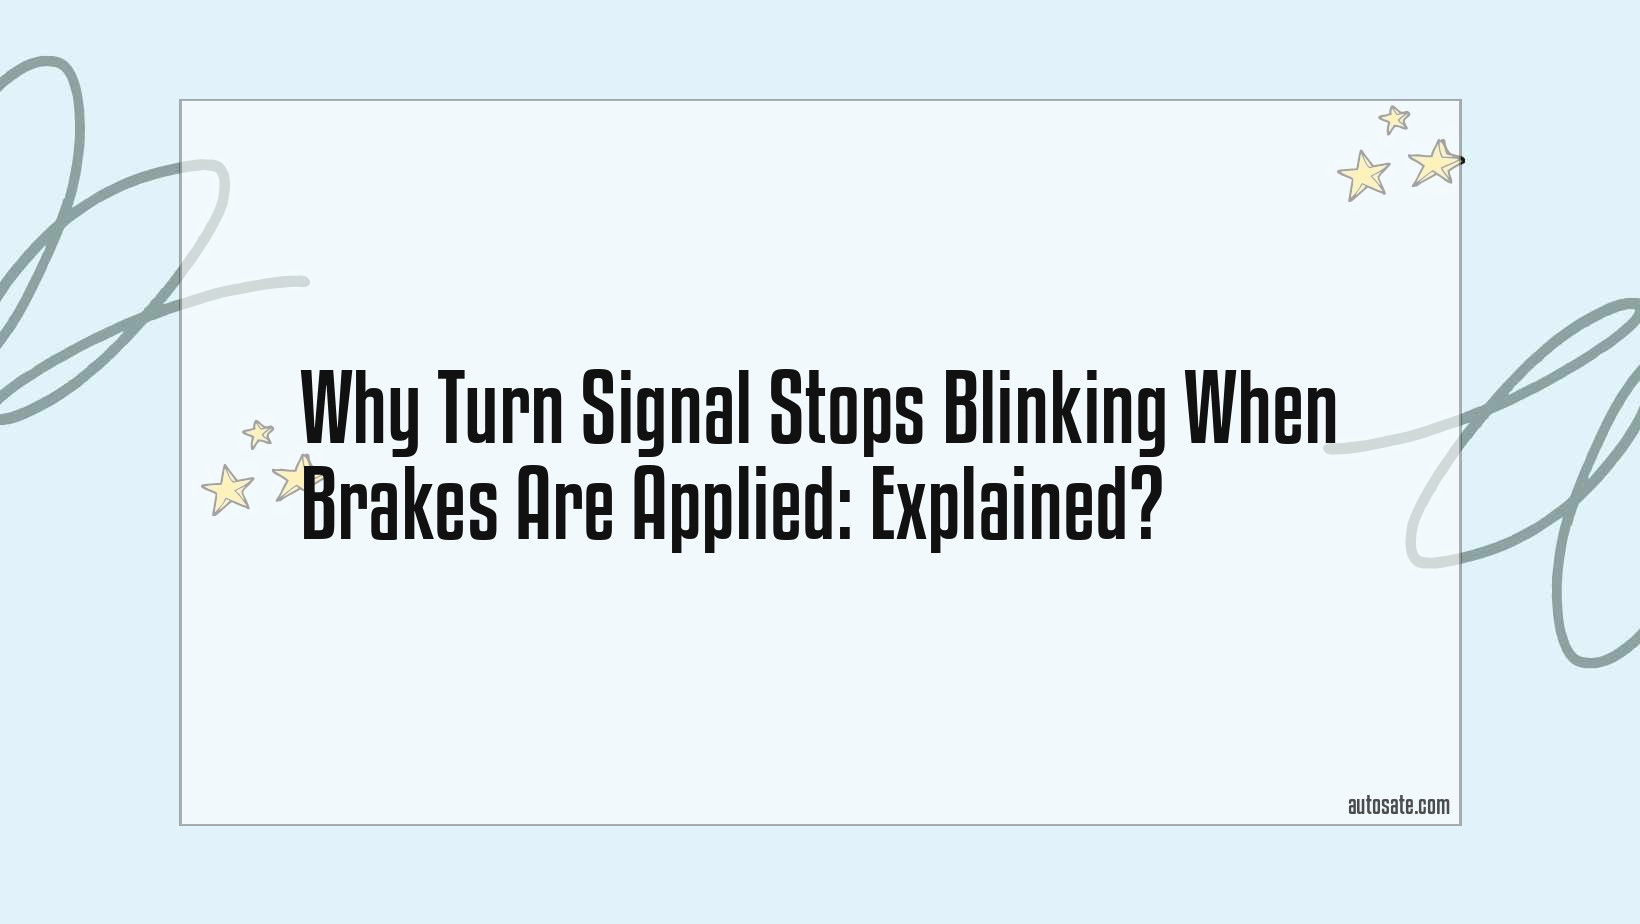 Why Turn Signal Stops Blinking When Brakes Are Applied: Explained